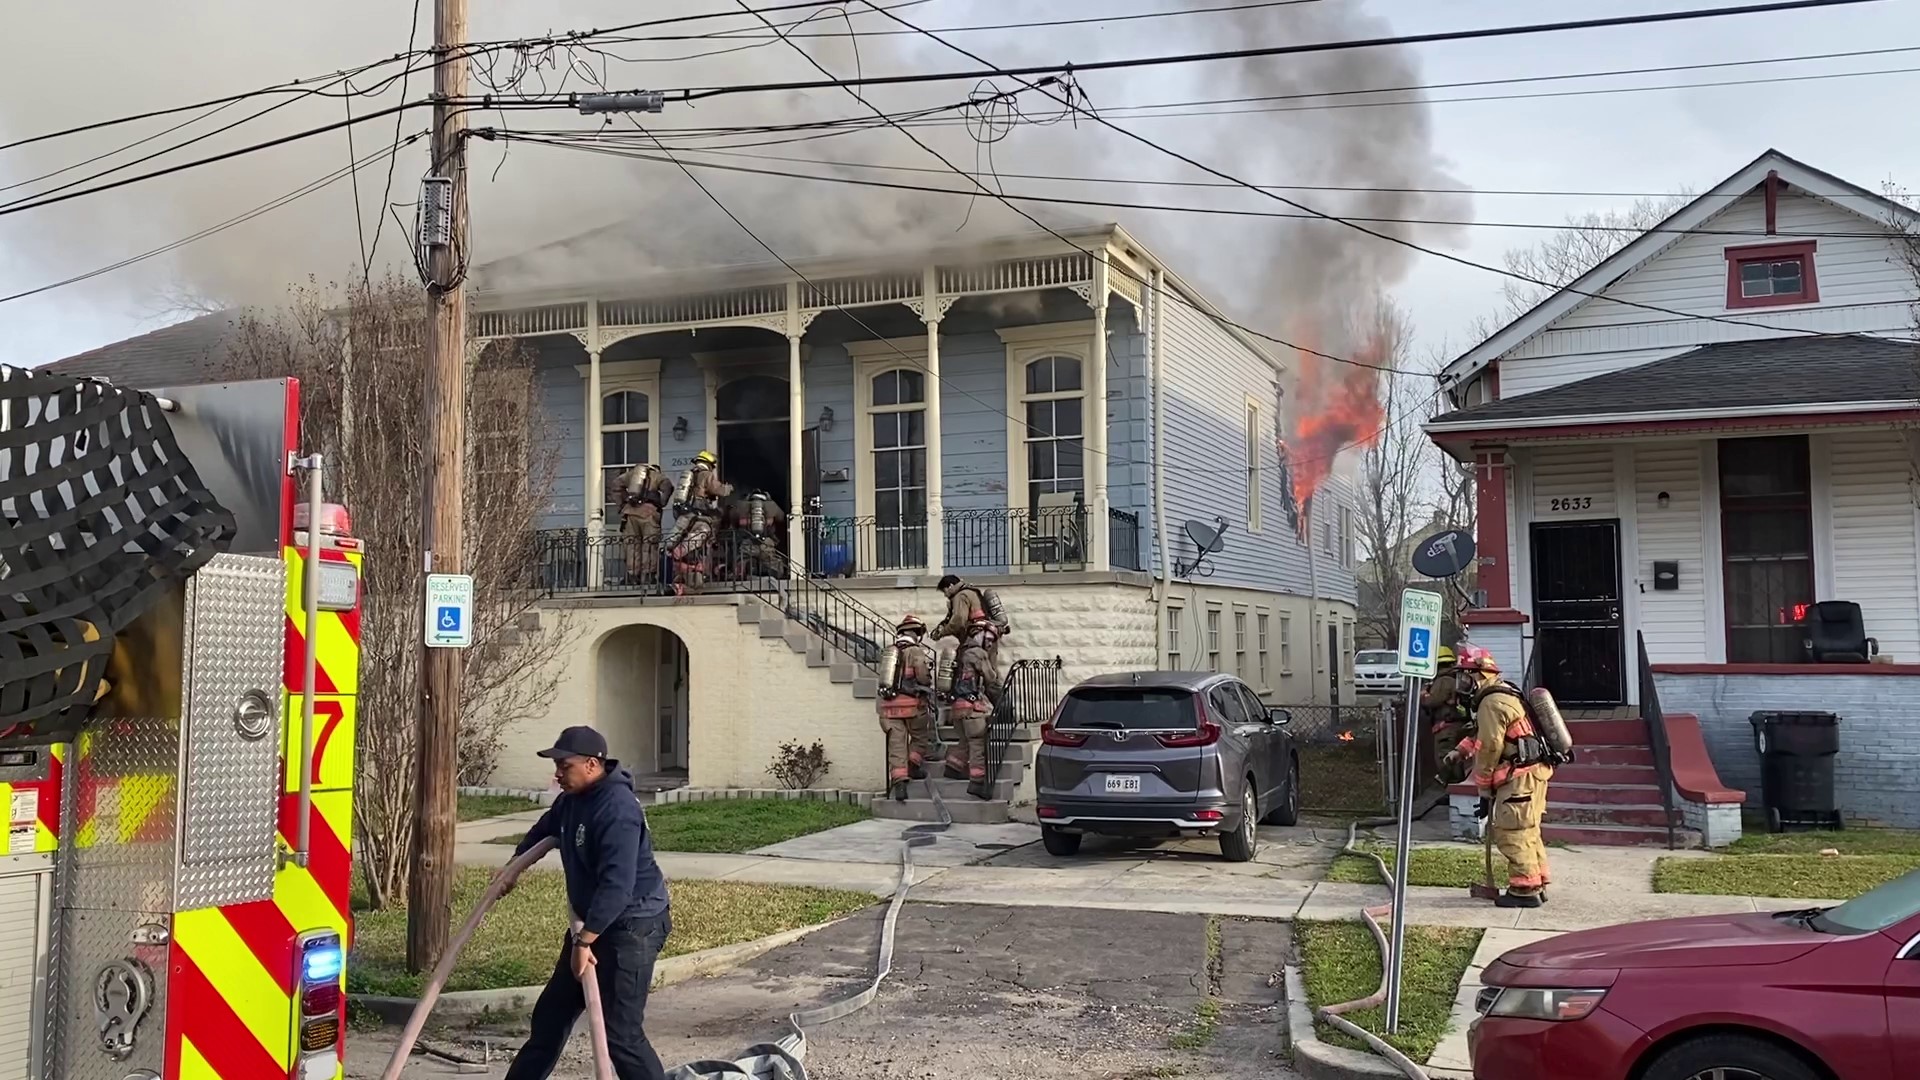 House fire in Treme.